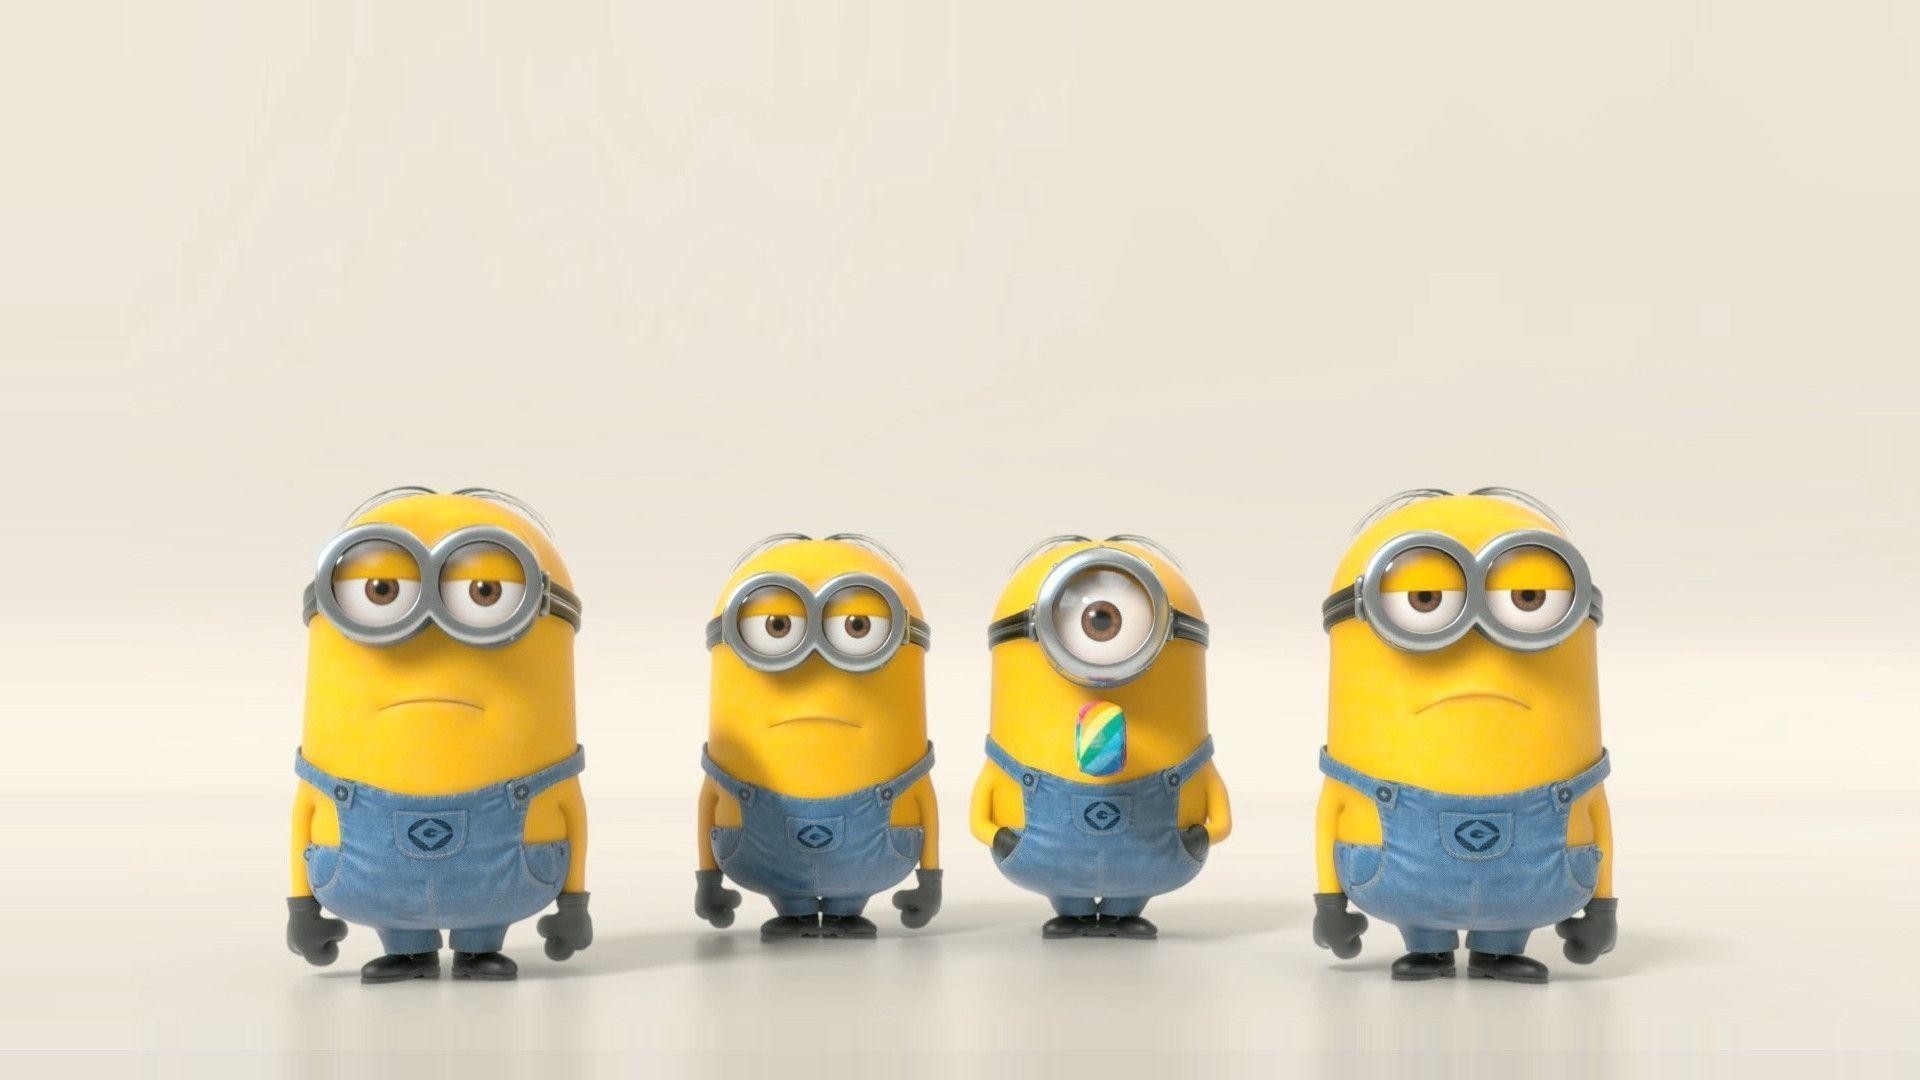 Dispicable Me Minions Mobile Phones Wallpapers Free - 4 Minions Images Hd -  1920x1080 Wallpaper 